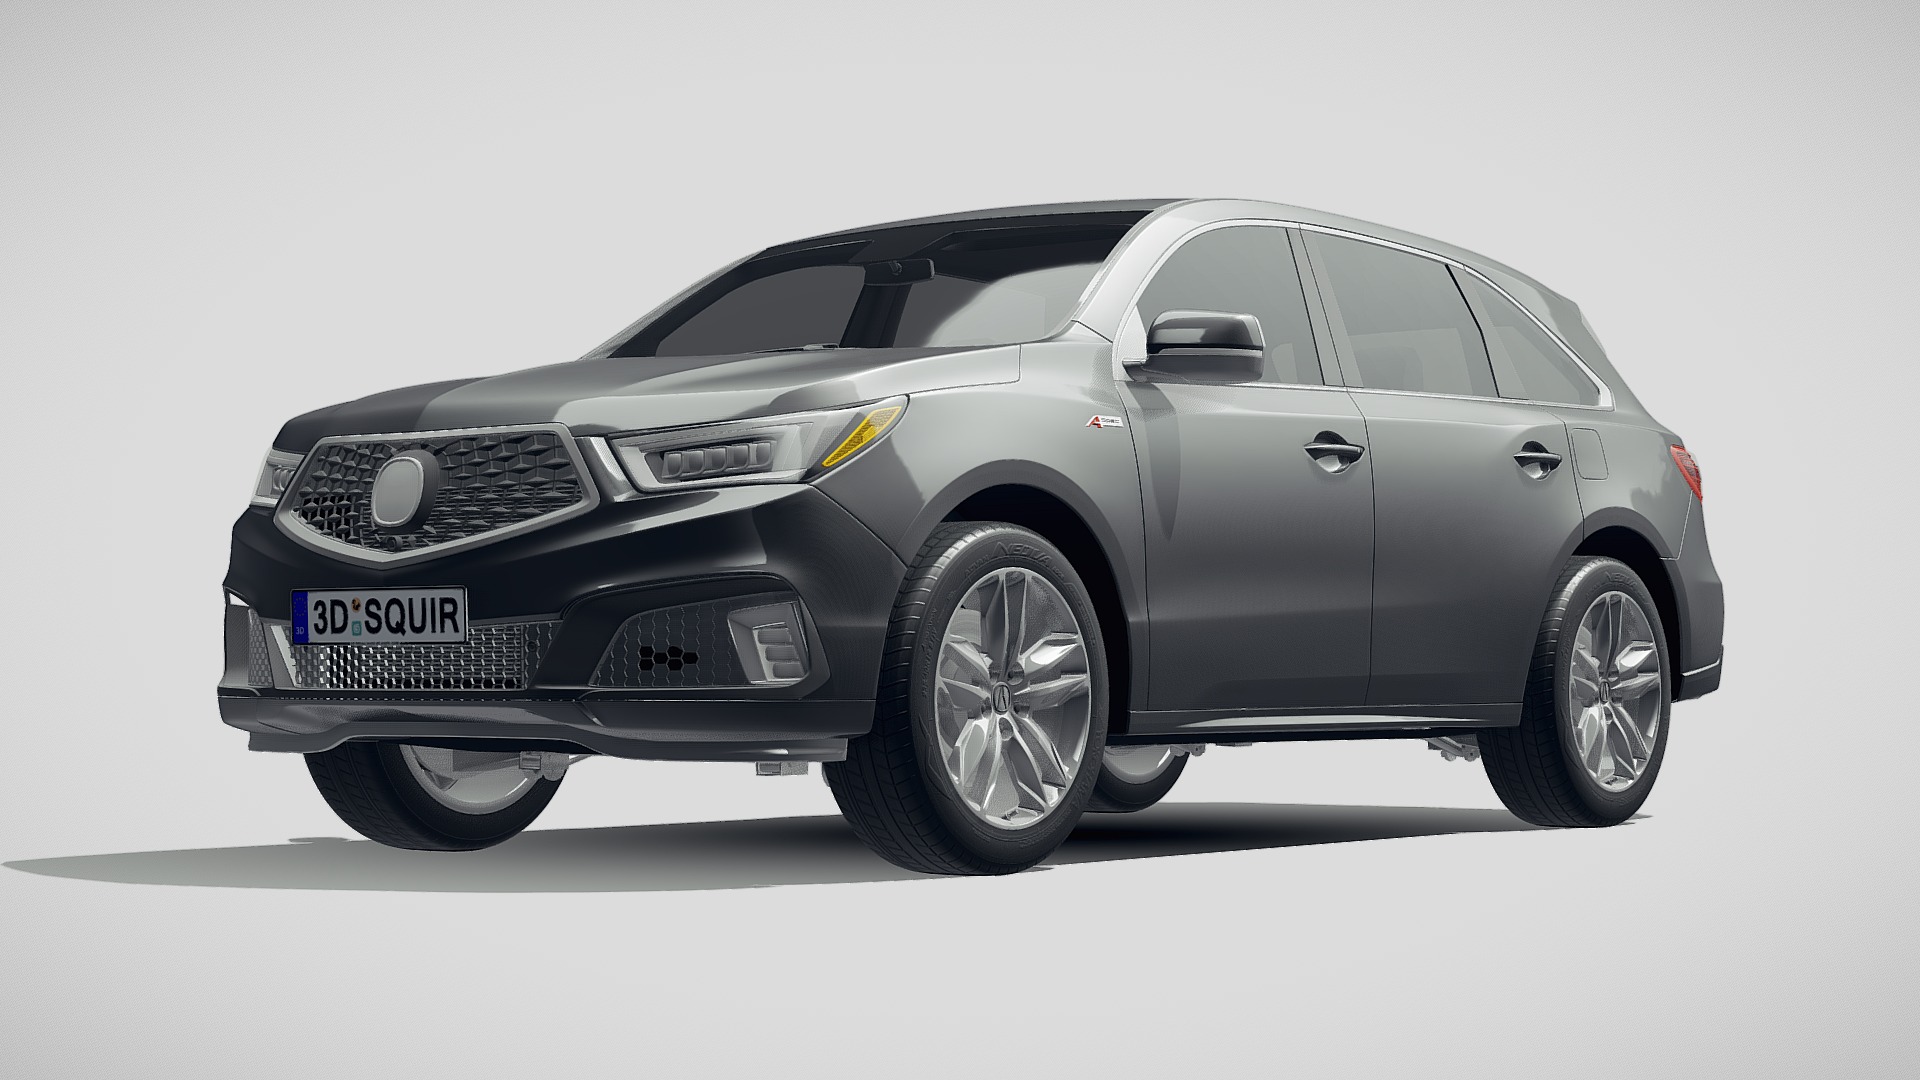 3D model Acura MDX A-Spec 2019 - This is a 3D model of the Acura MDX A-Spec 2019. The 3D model is about a silver car with a black top.